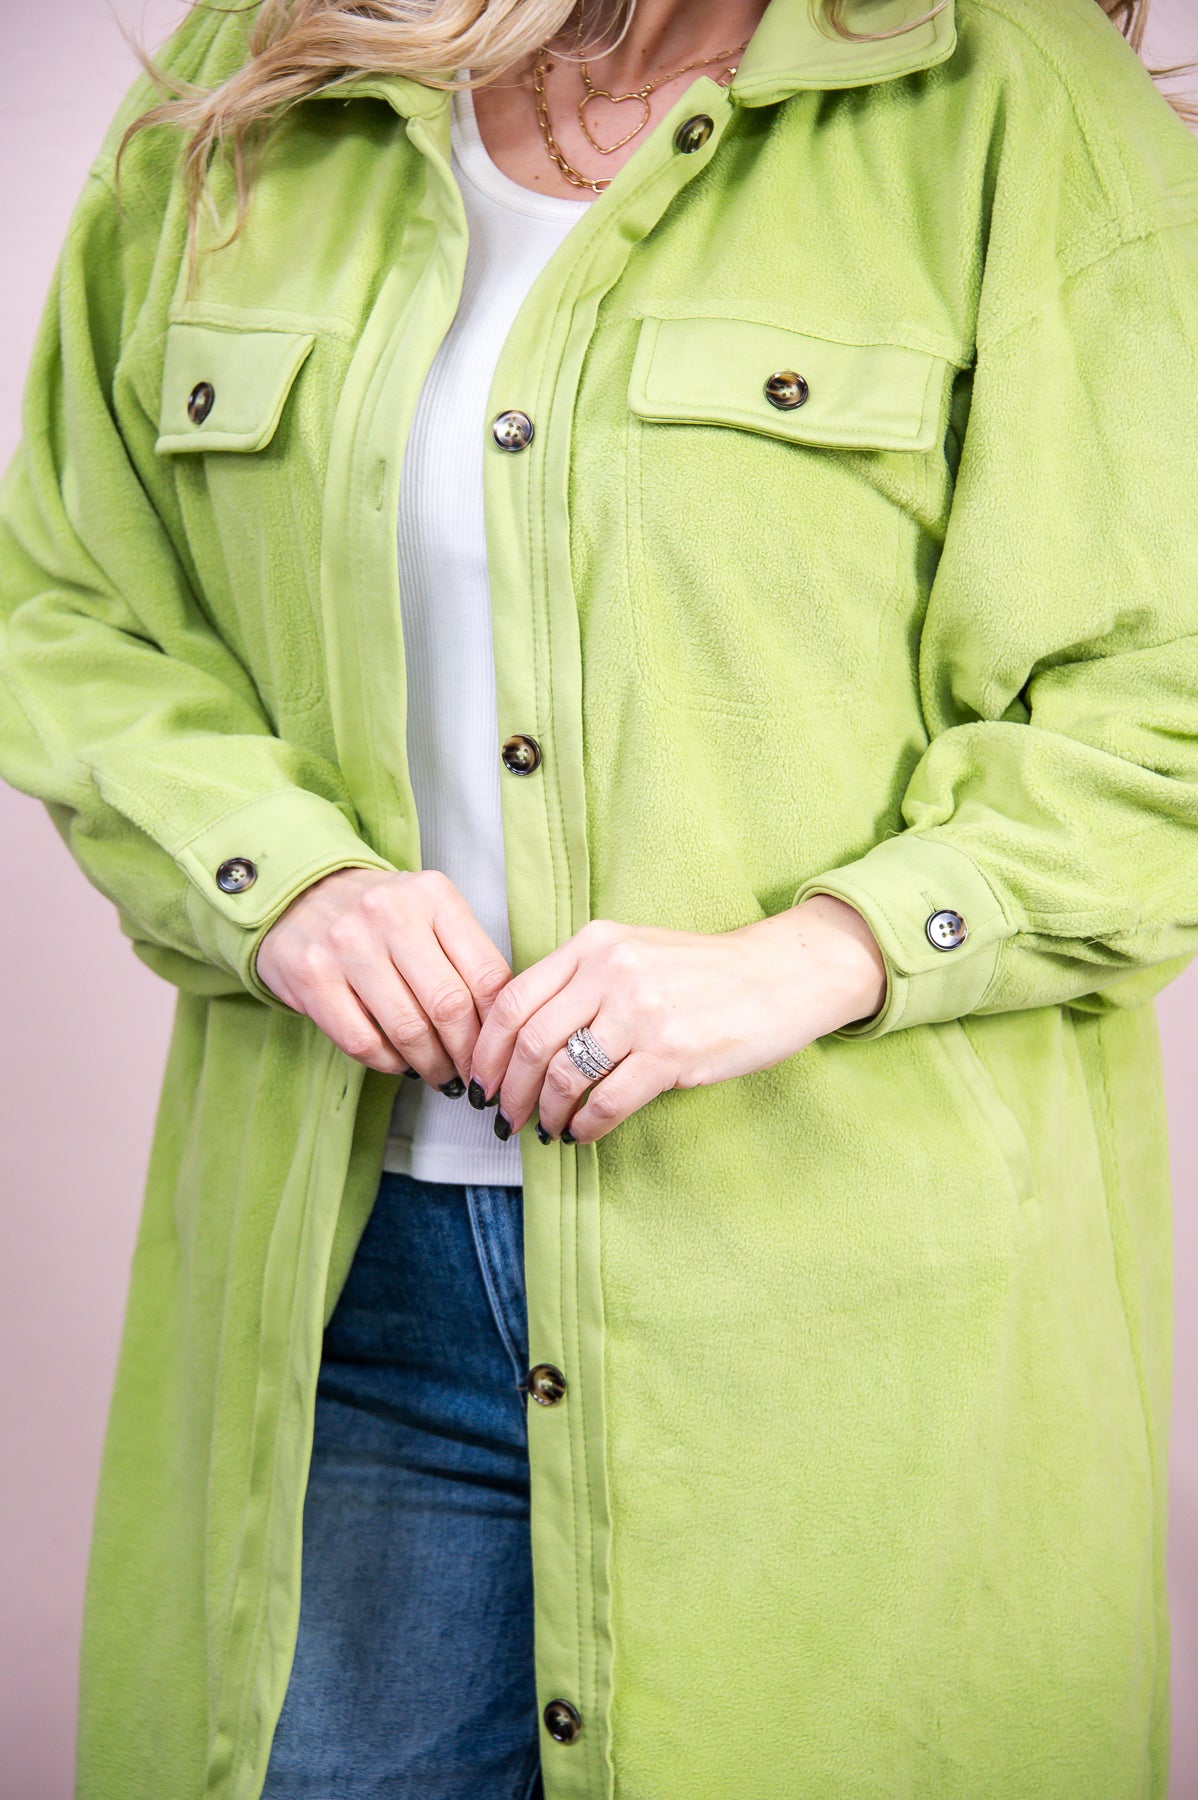 Leading The Way Dusty Lime Green Solid Long Jacket - O5248DLG